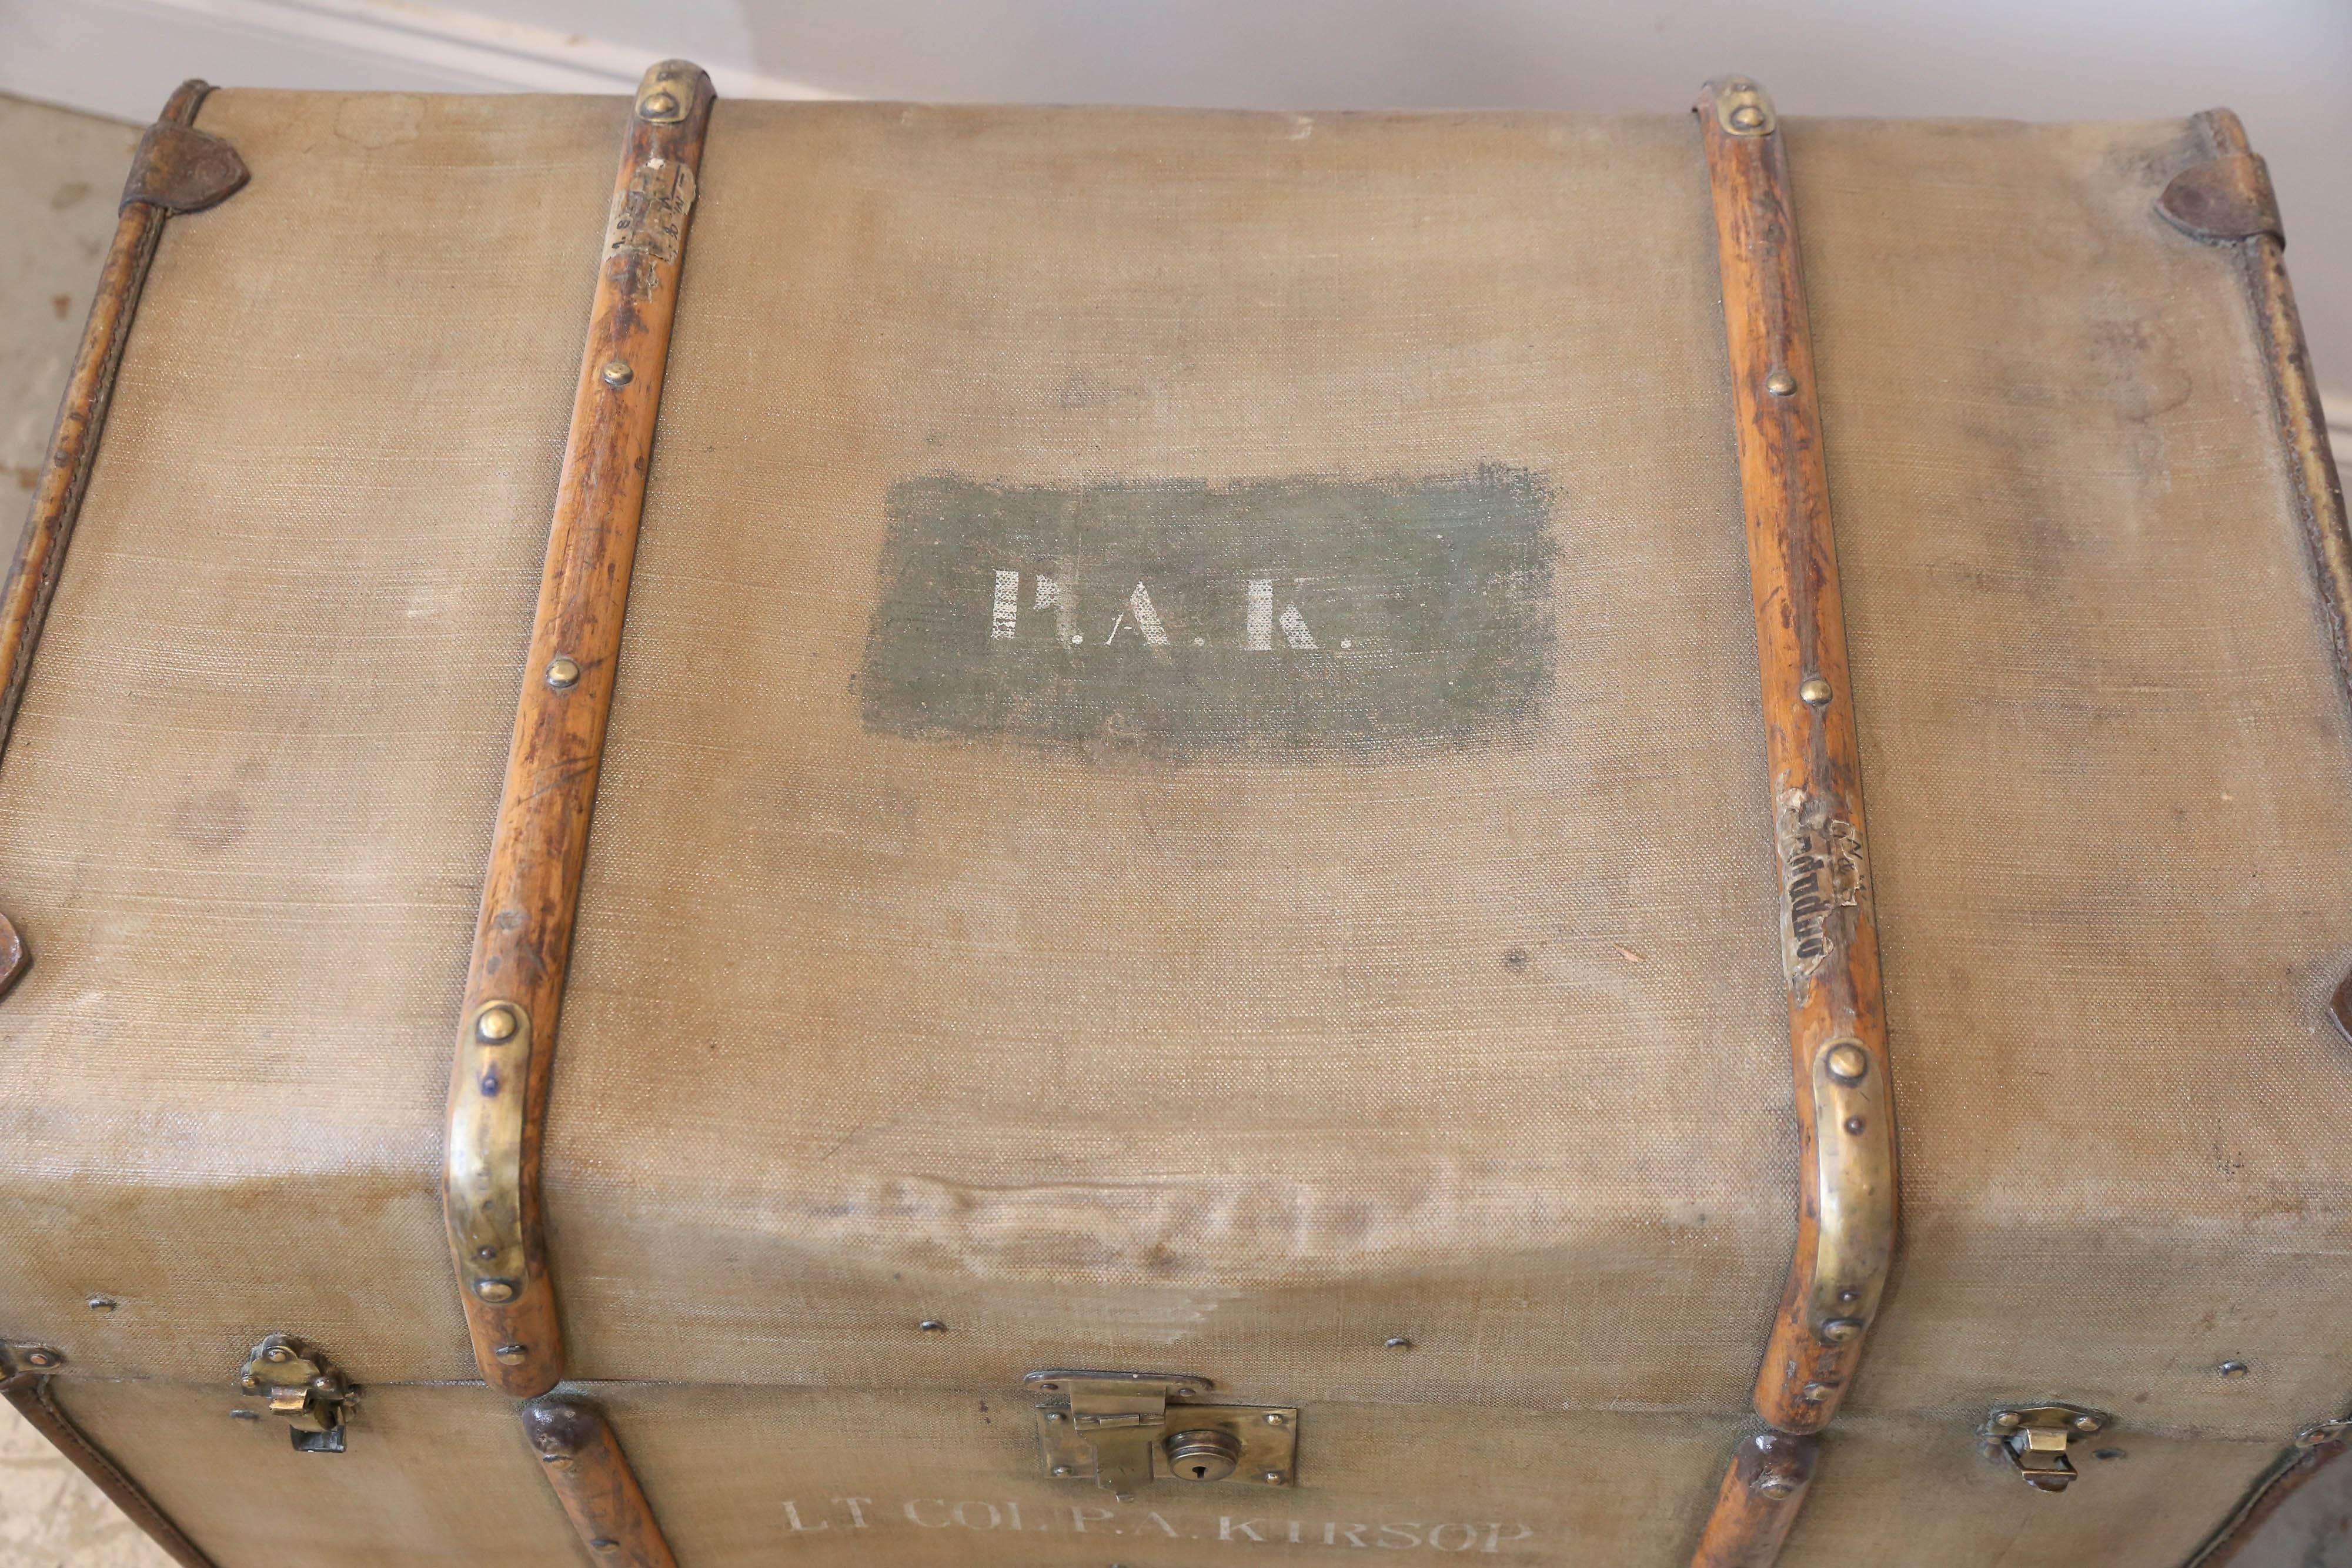 This canvas artillery trunk was sourced in France and dates to the 1940s during World War II. The interior is sectioned and there is a lock on the front of the piece, but no key. There are two additional latches which allow you to securely close the